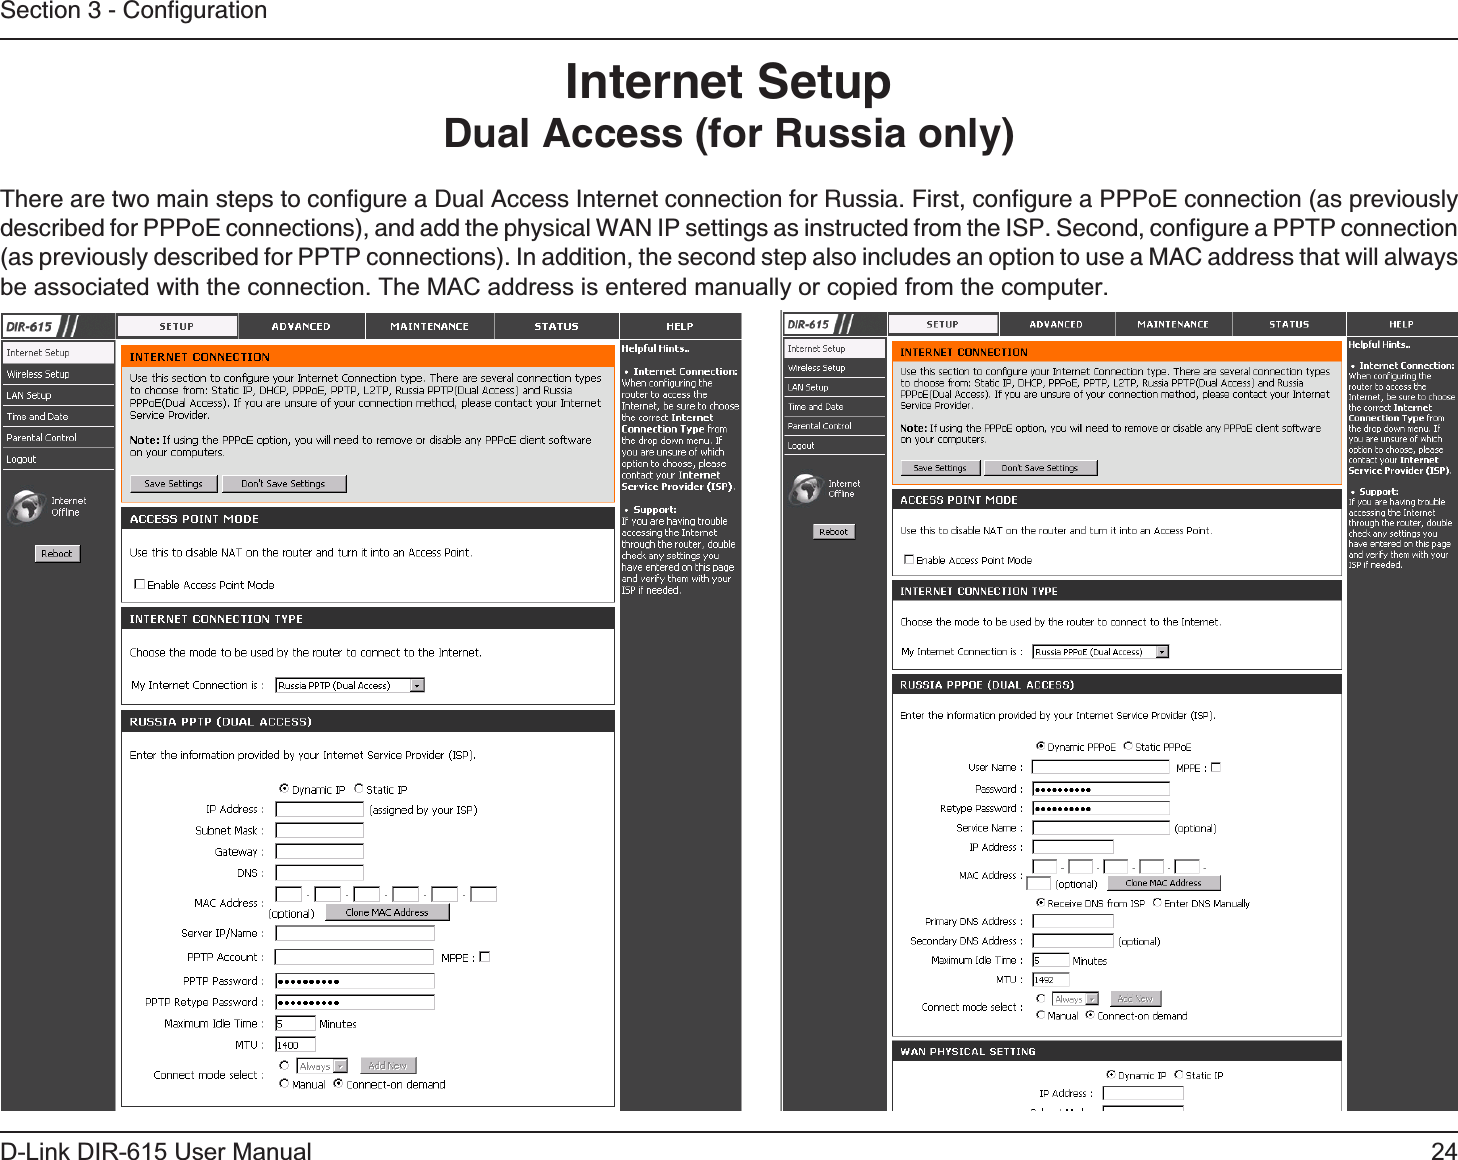 24D-Link DIR-615 User ManualSection 3 - ConﬁgurationInternet SetupDual Access (for Russia only)There are two main steps to conﬁgure a Dual Access Internet connection for Russia. First, conﬁgure a PPPoE connection (as previously described for PPPoE connections), and add the physical WAN IP settings as instructed from the ISP. Second, conﬁgure a PPTP connection (as previously described for PPTP connections). In addition, the second step also includes an option to use a MAC address that will always be associated with the connection. The MAC address is entered manually or copied from the computer.